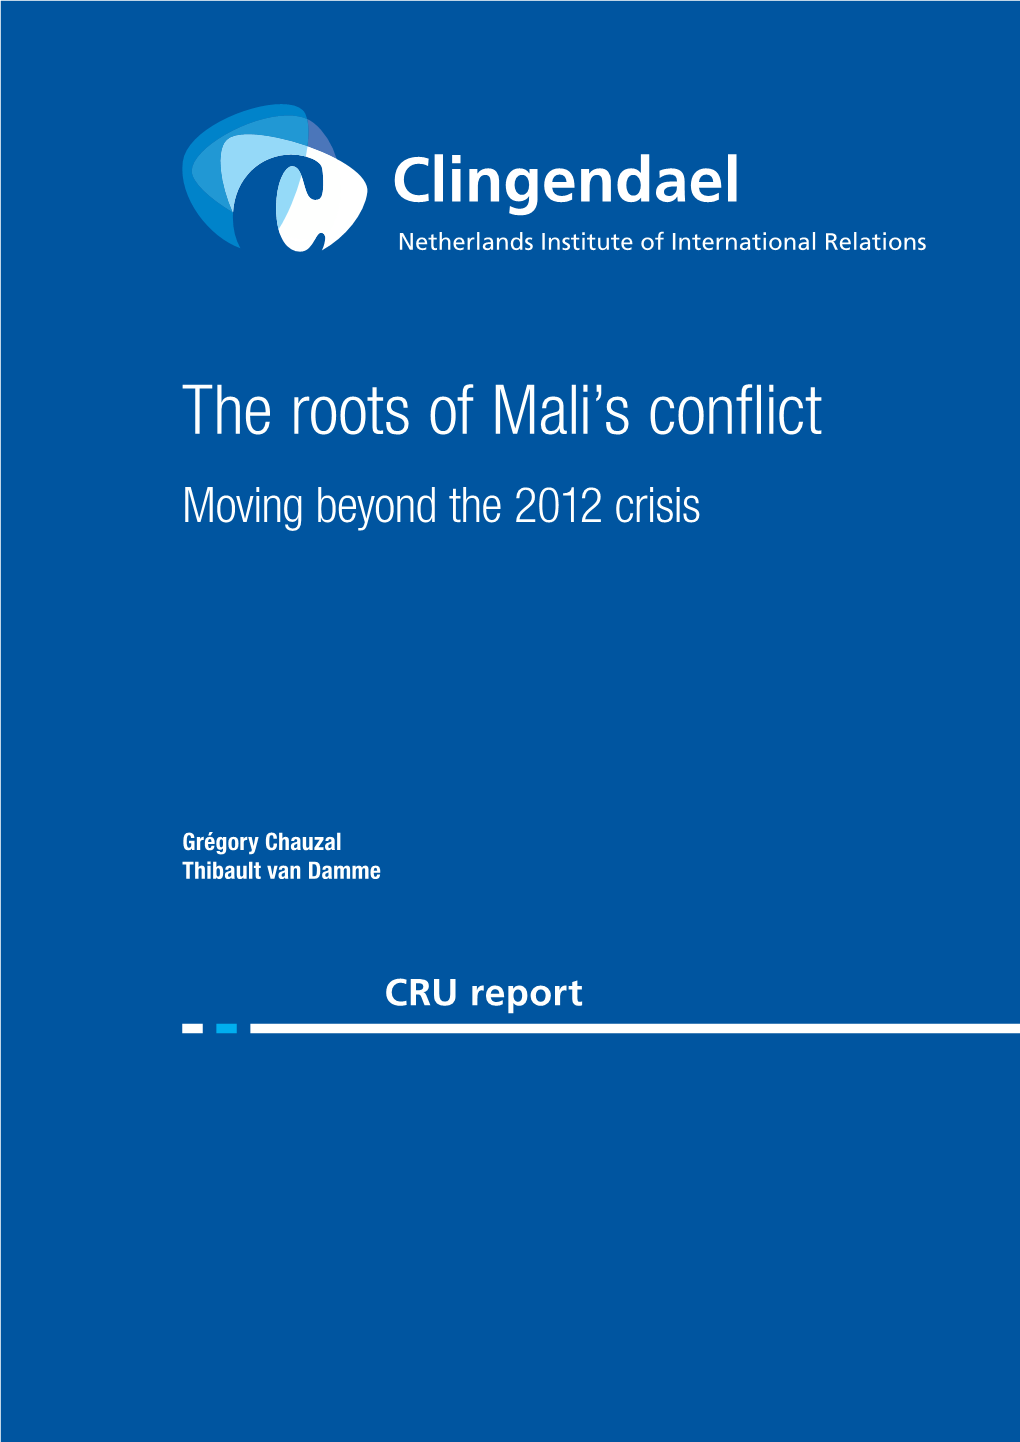 The Roots of Mali's Conflict